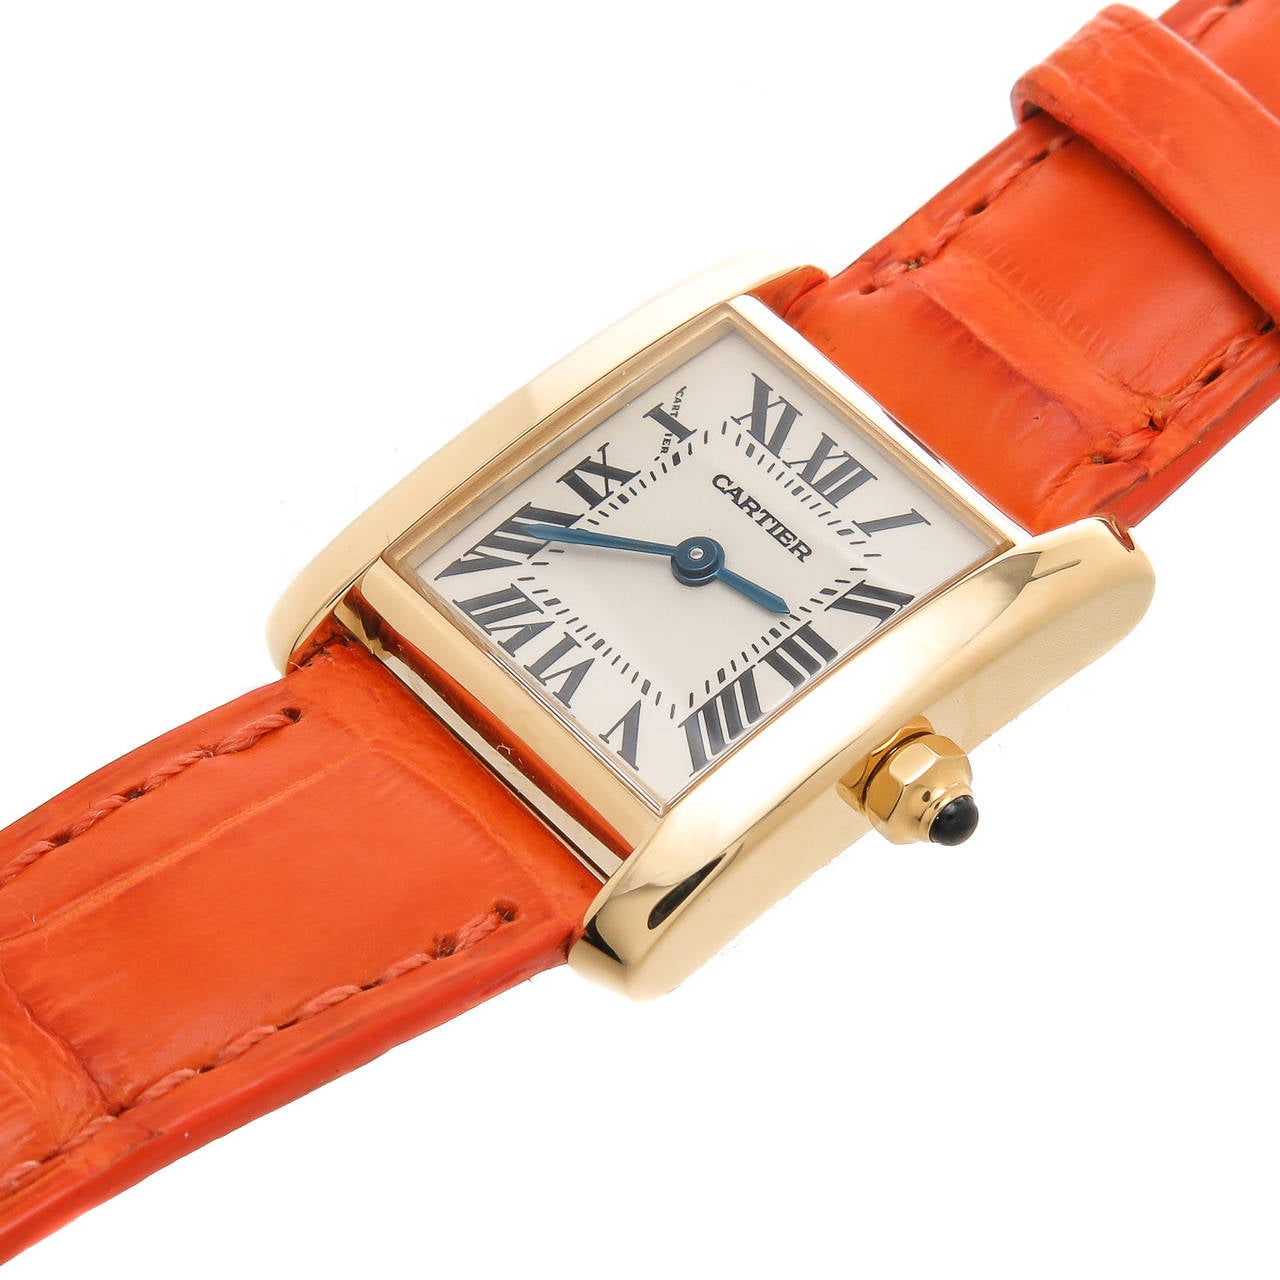 Circa 2010 Cartier 18K yellow gold Tank Francaise, water resistant case measuring 25 MM  X  20 MM. Quartz movement, white dial with black Roman numerals. Sapphire crown. New Cartier padded light orange-brown strap with Cartier 18K gold buckle.